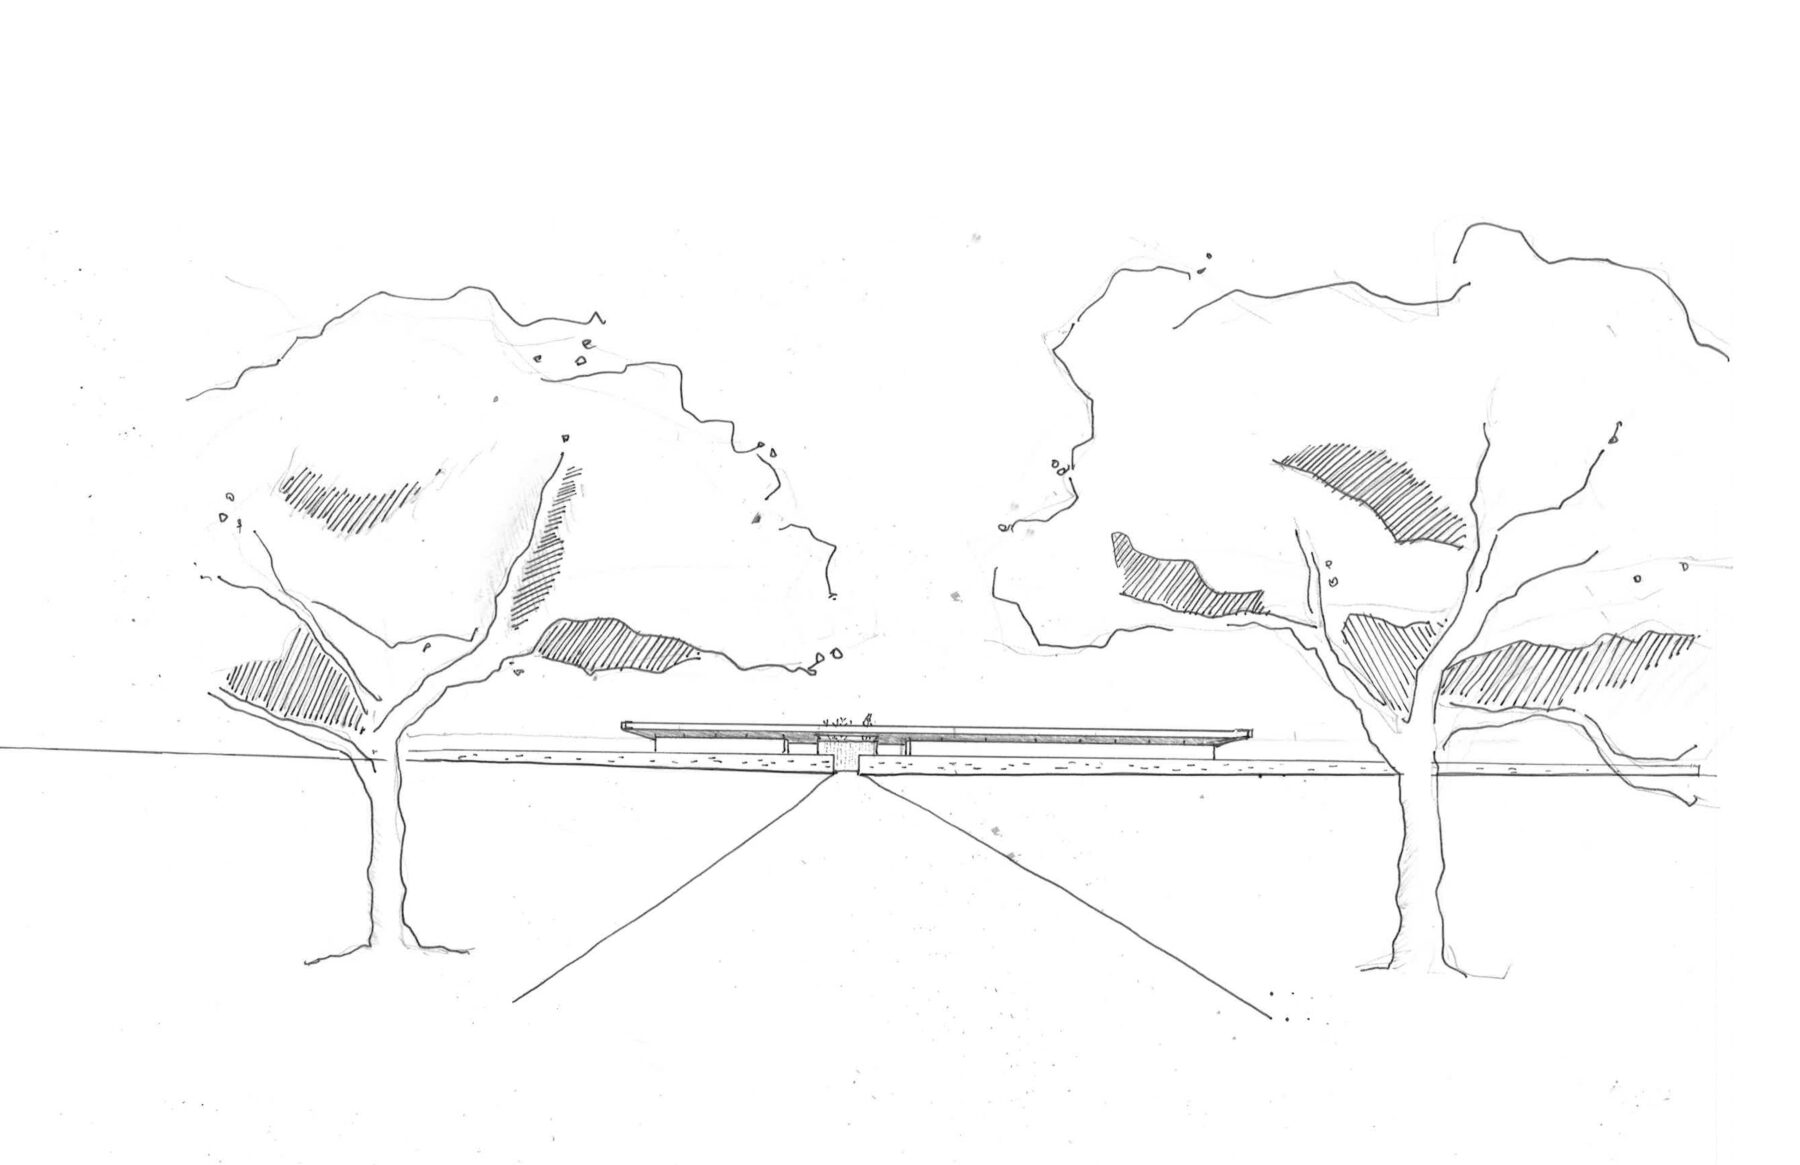 An early line drawing sketch of the Bonnet Springs Park Event Center showing its horizontal emphasis in its long low roofline.